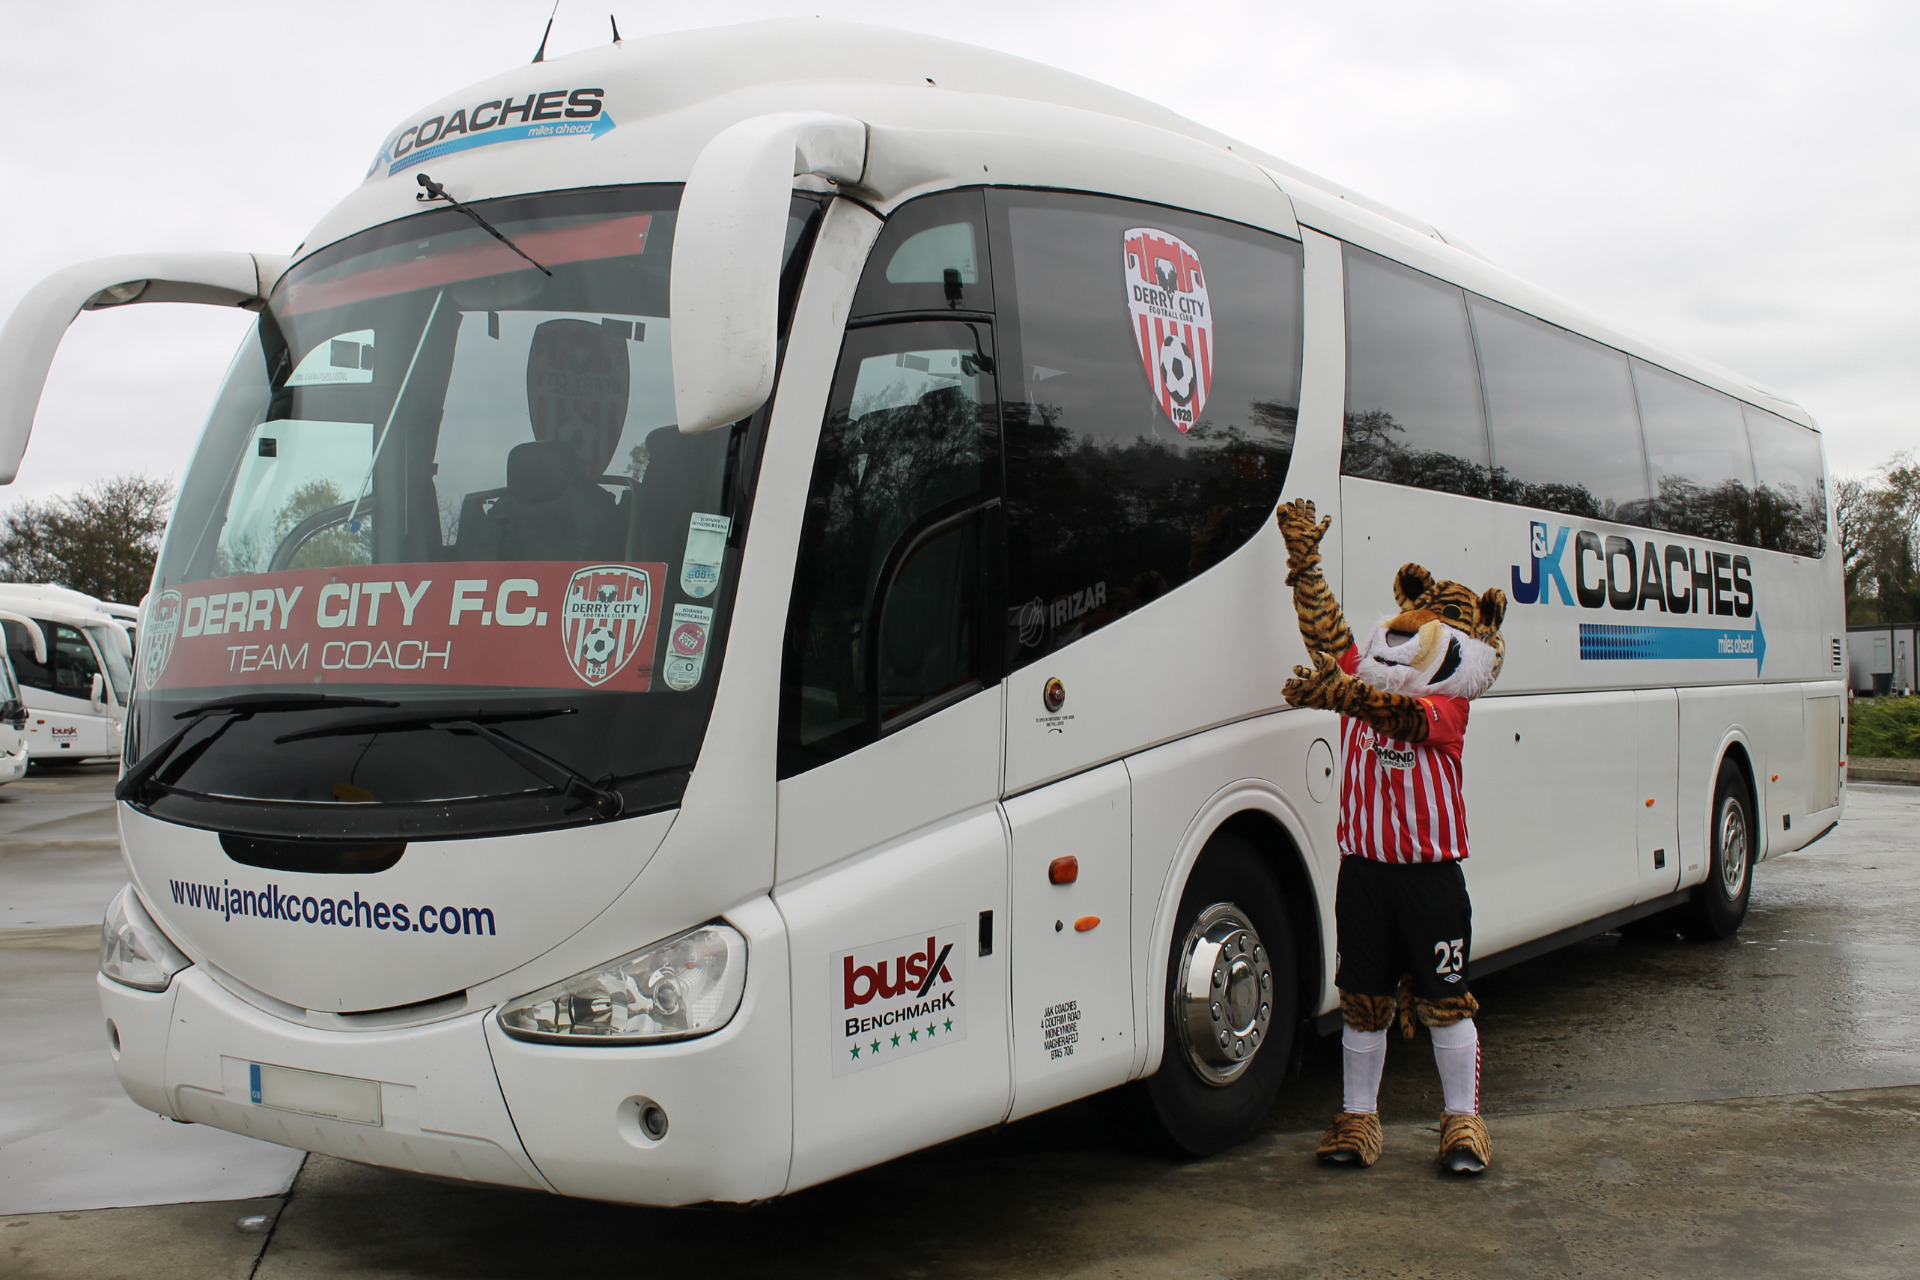 J&K Coaches Limited and Derry City Football Club Sponsorship